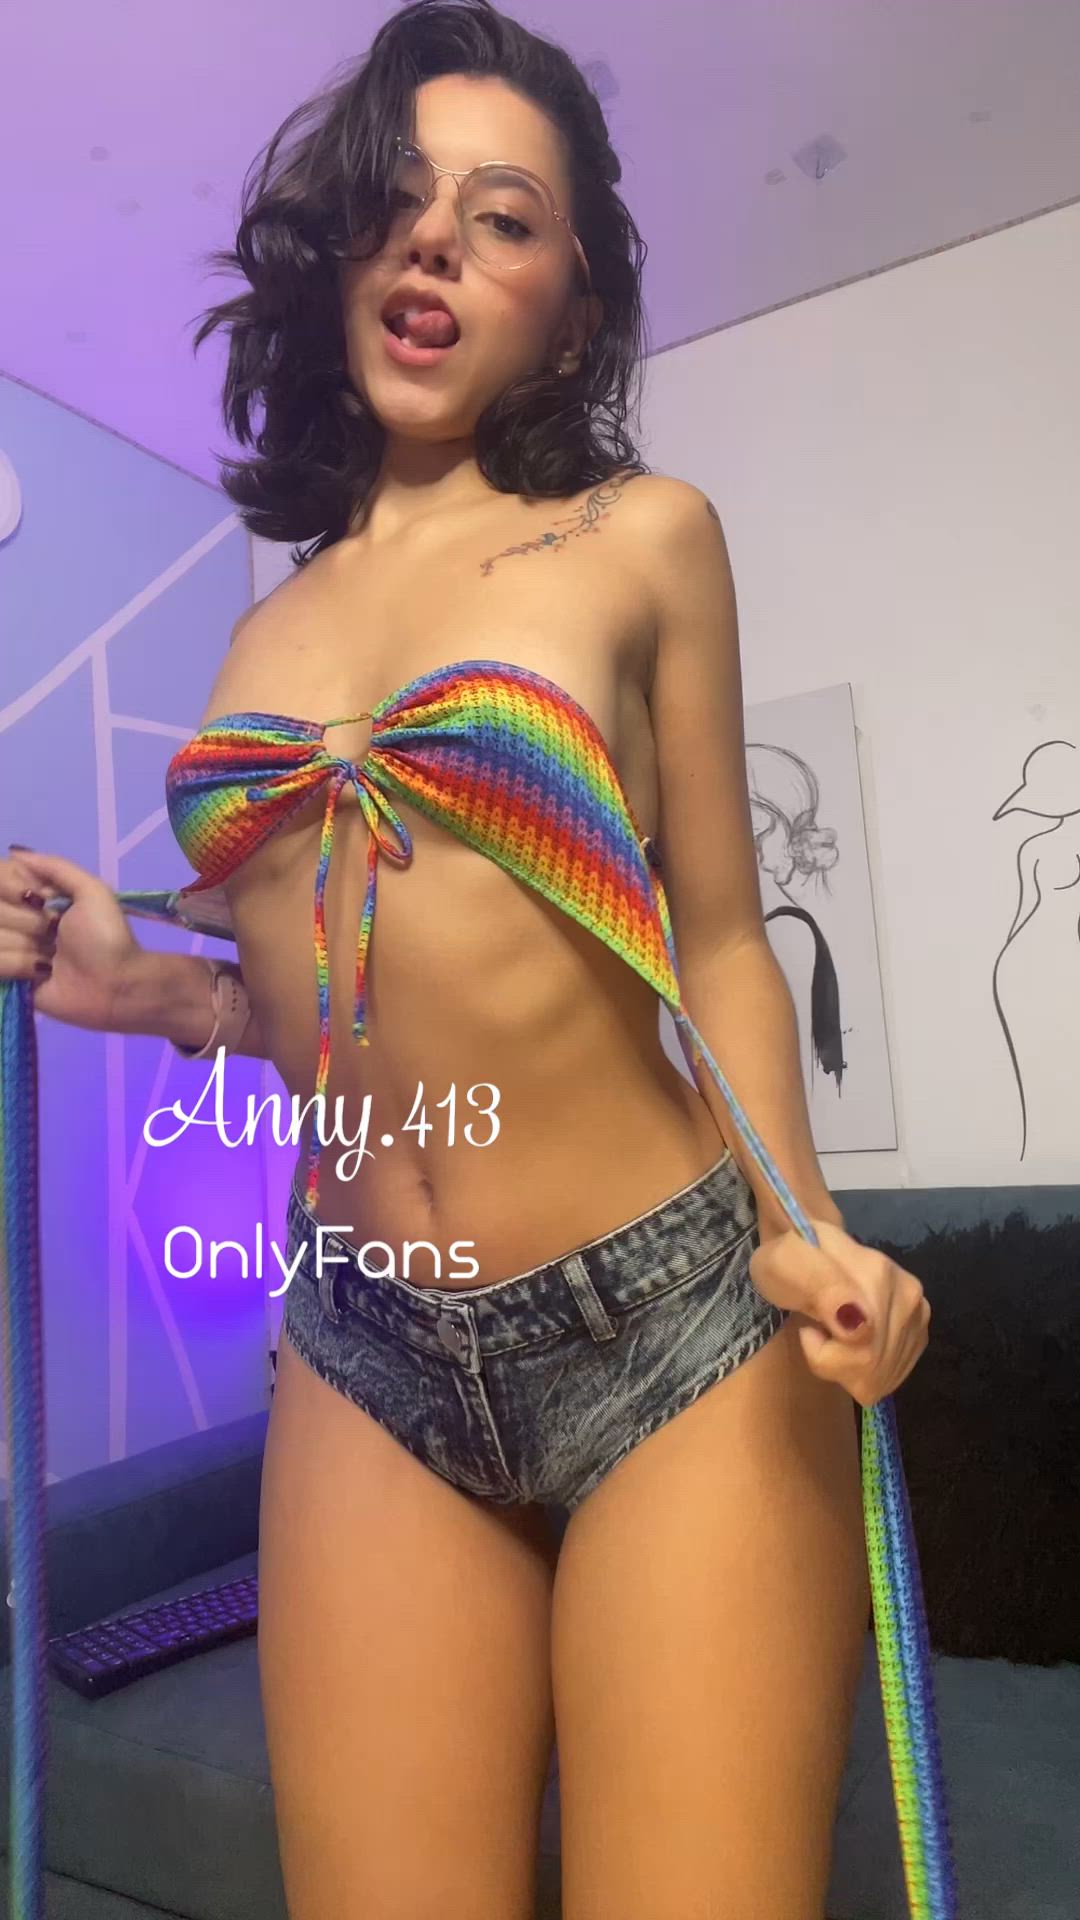 Tits porn video with onlyfans model anny413 <strong>@anny.413</strong>